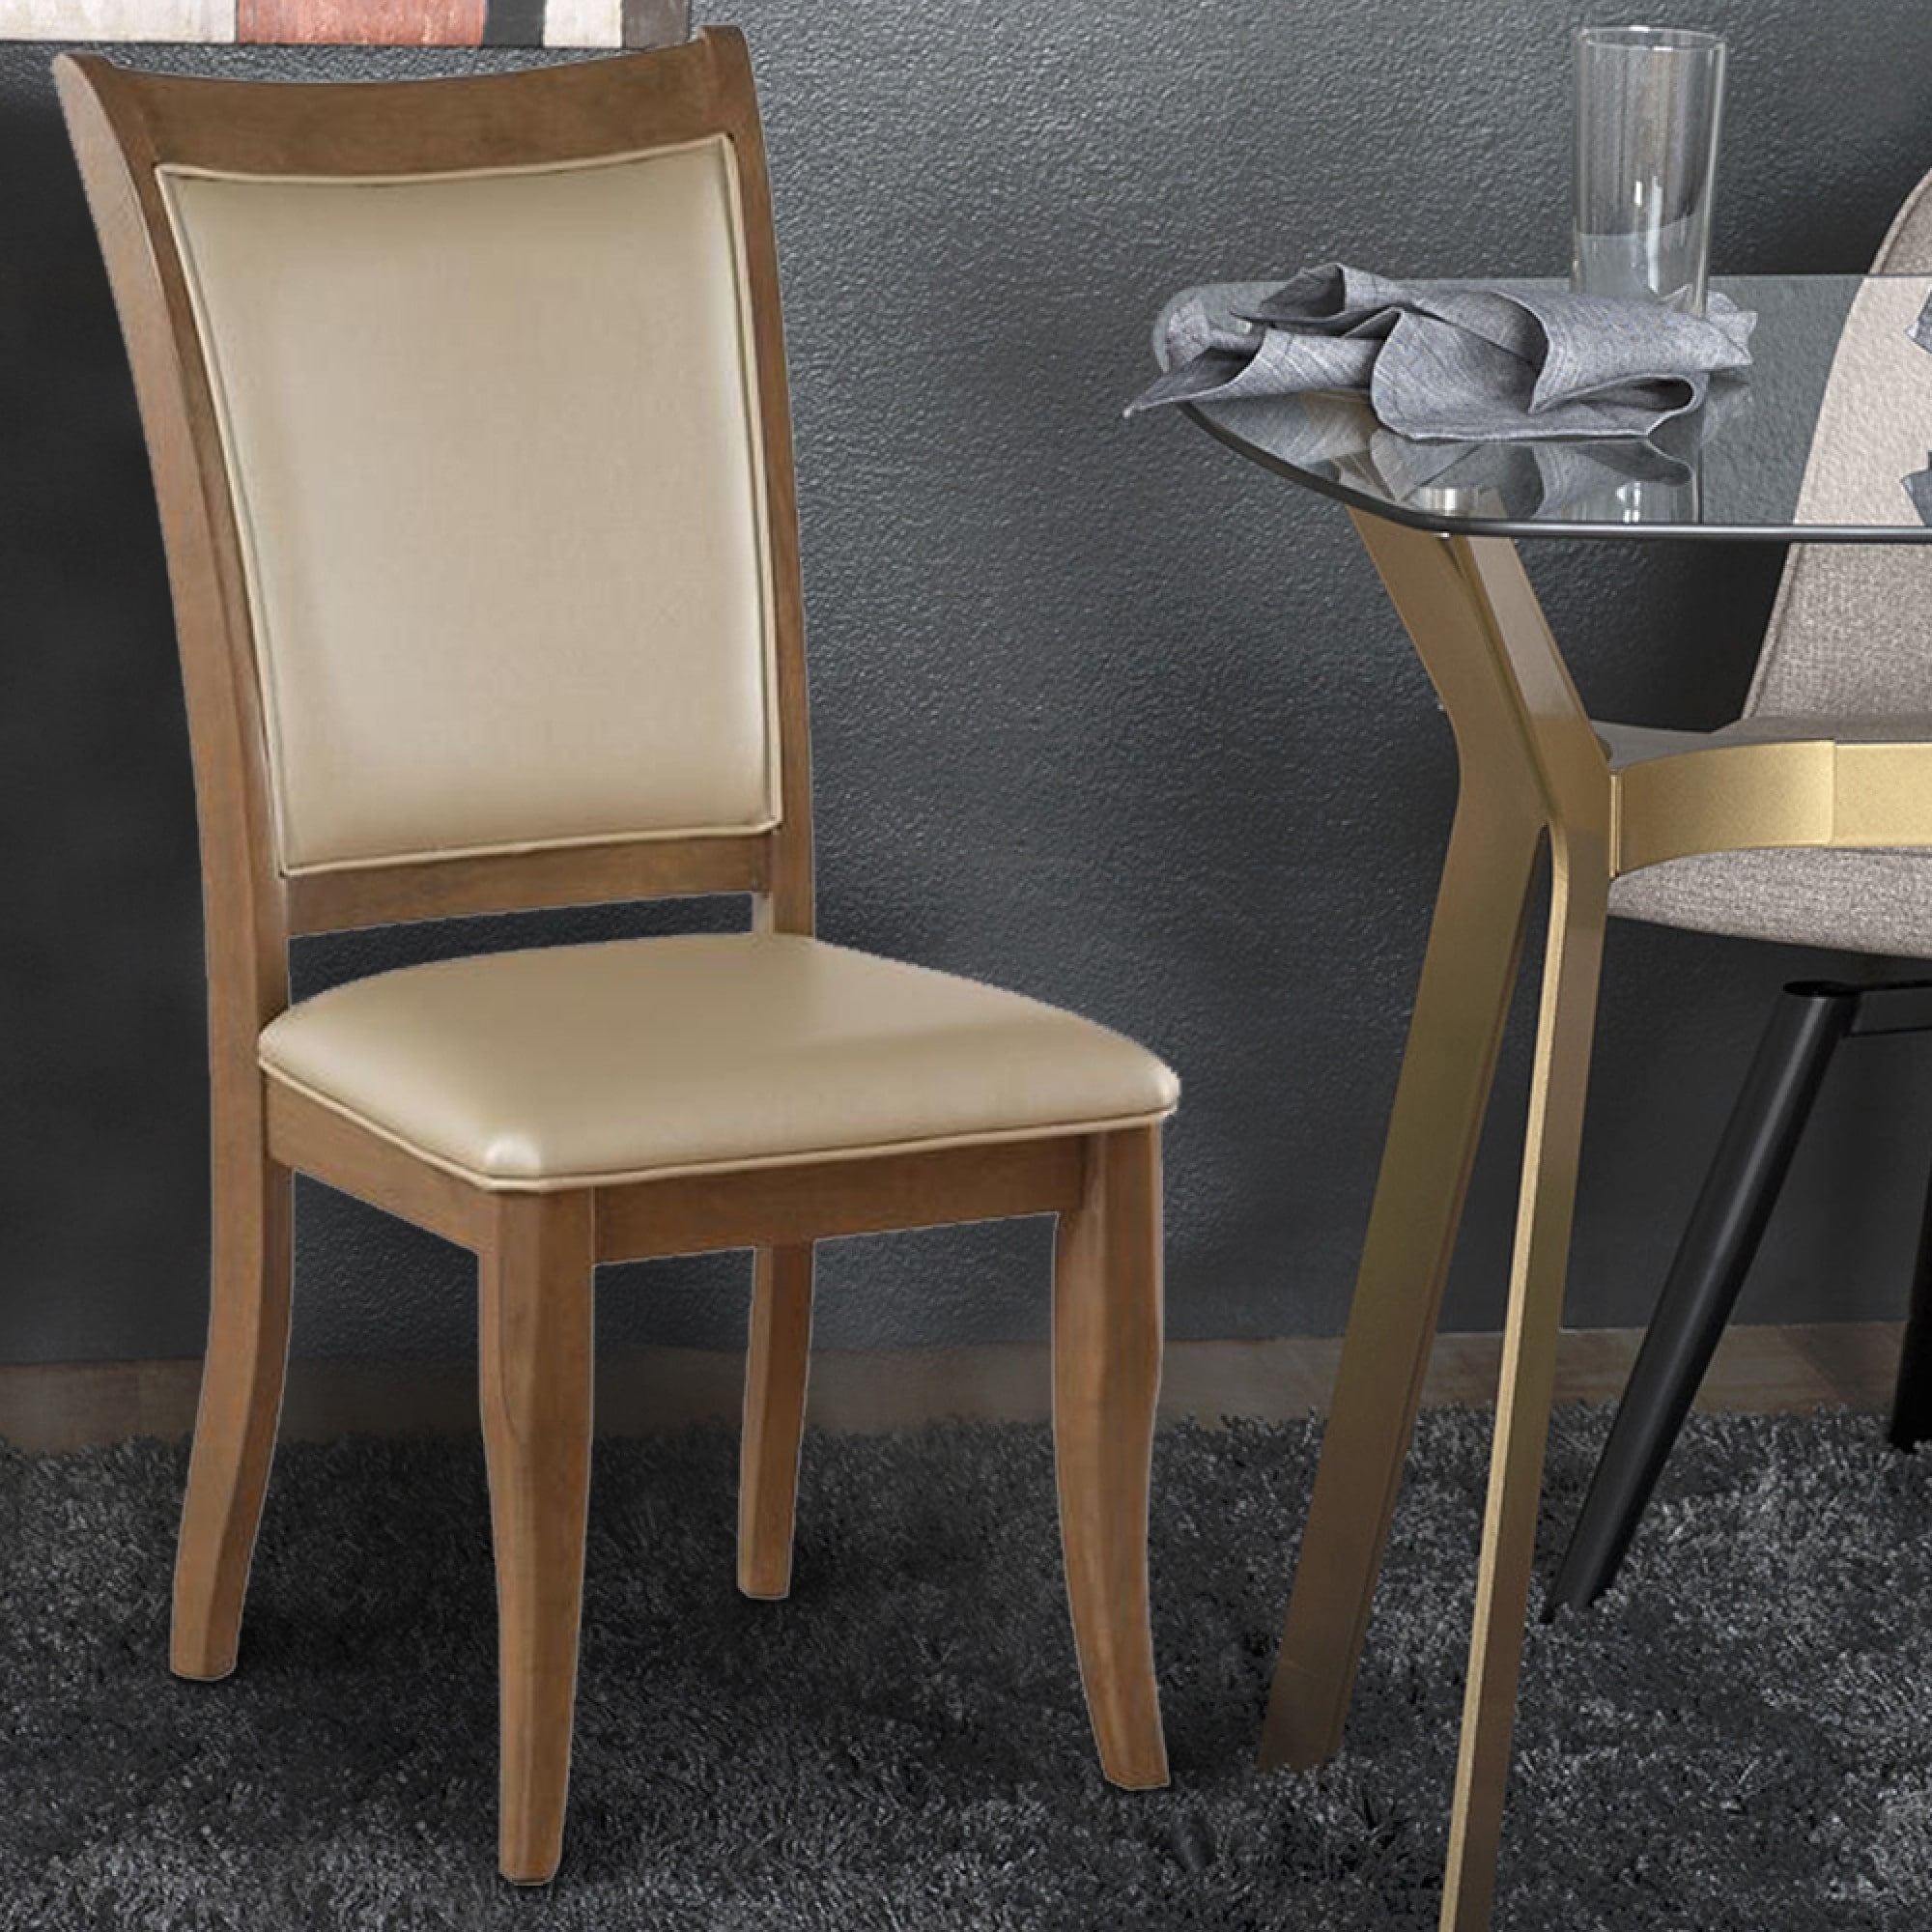 Leatherette Upholstered Wooden Side Chair, Set of 2, Beige and Brown